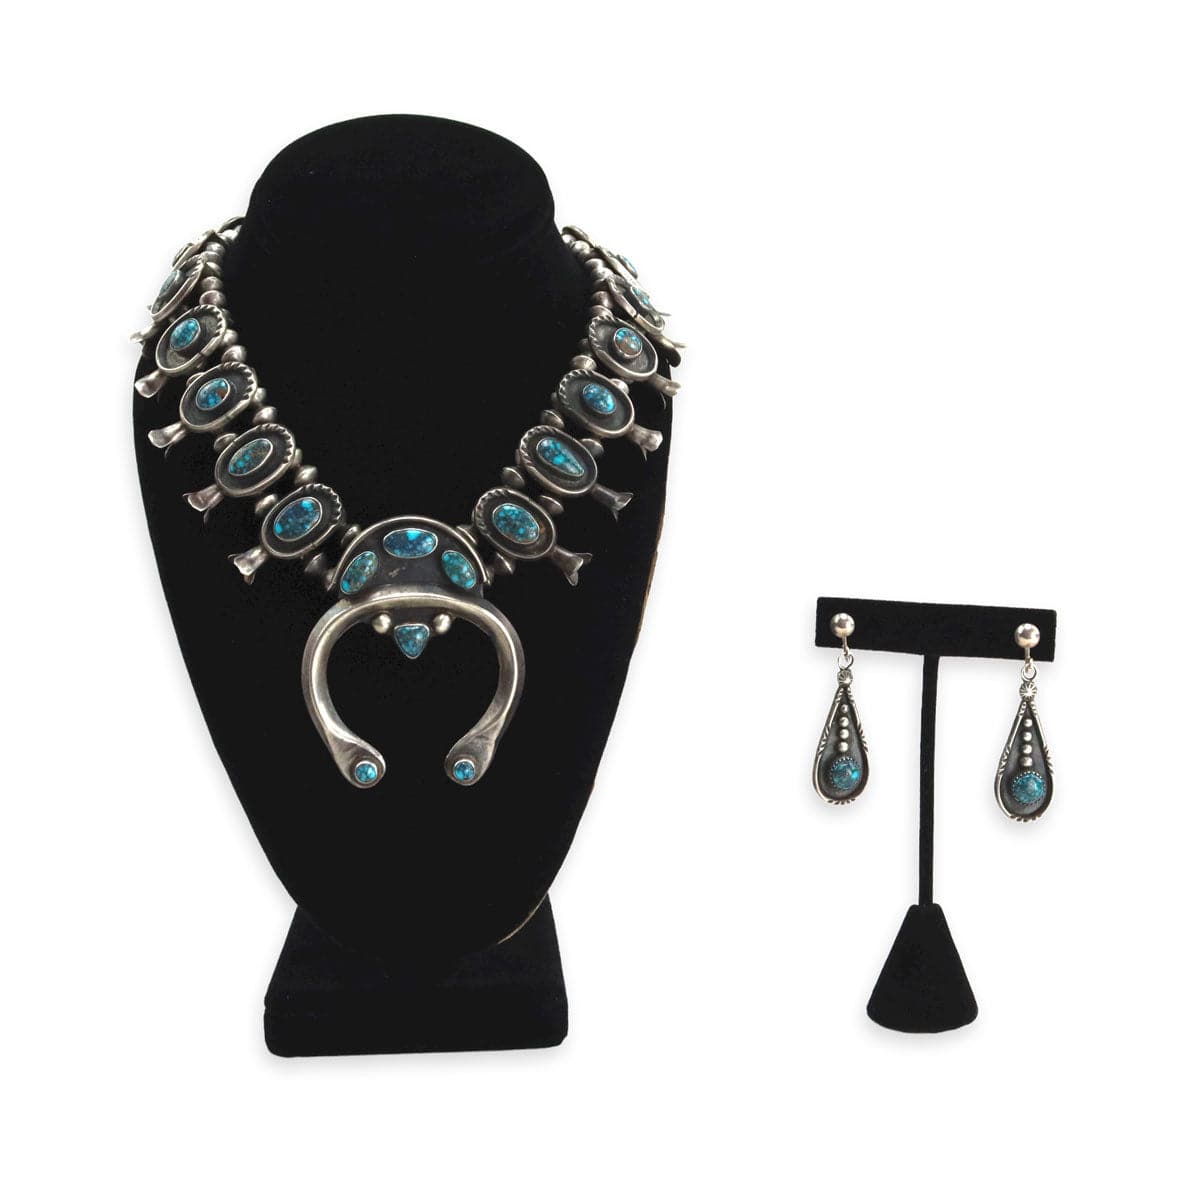 Navajo Lone Mountain Turquoise and Silver Squash Blossom Necklace and Earrings Set c. 1950s (J15120-CO-027)